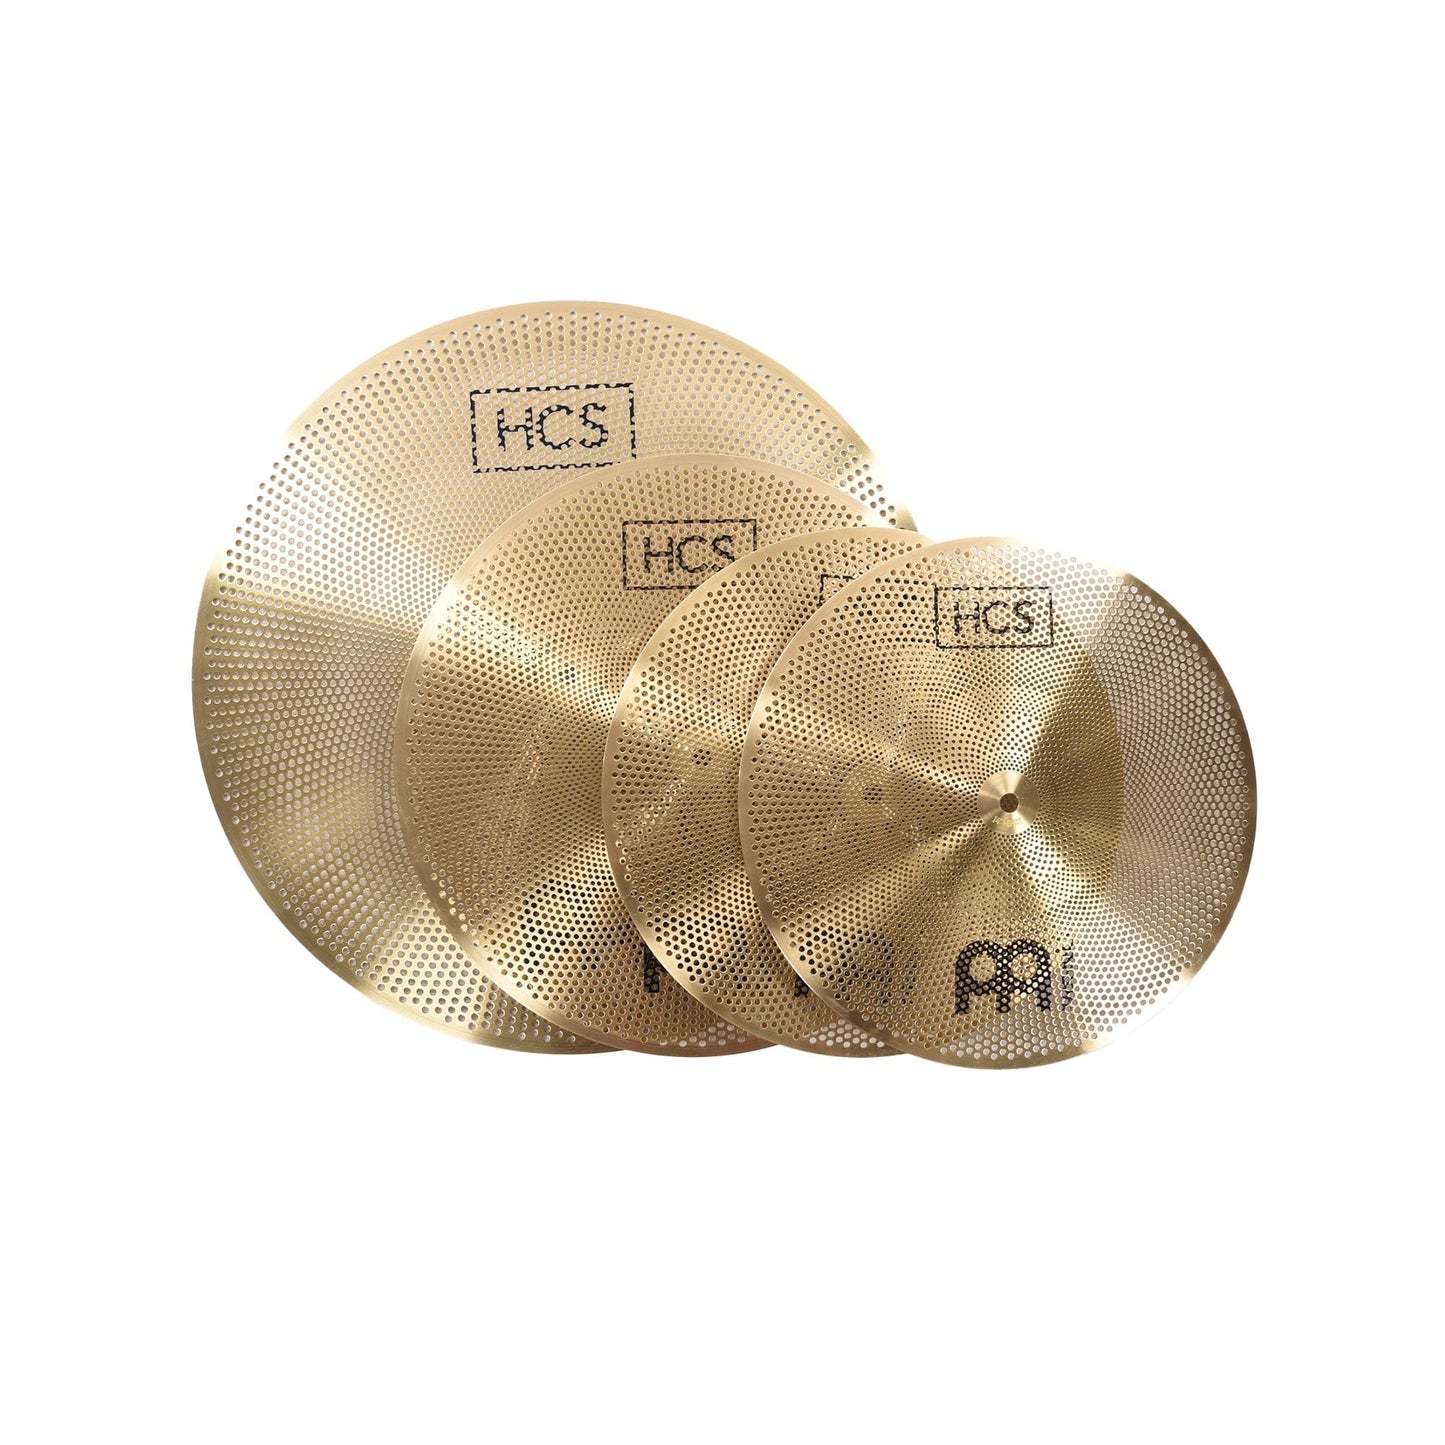 Meinl HCS Practice Cymbal Set (14/16/20) Drums and Percussion / Cymbals / Cymbal Packs